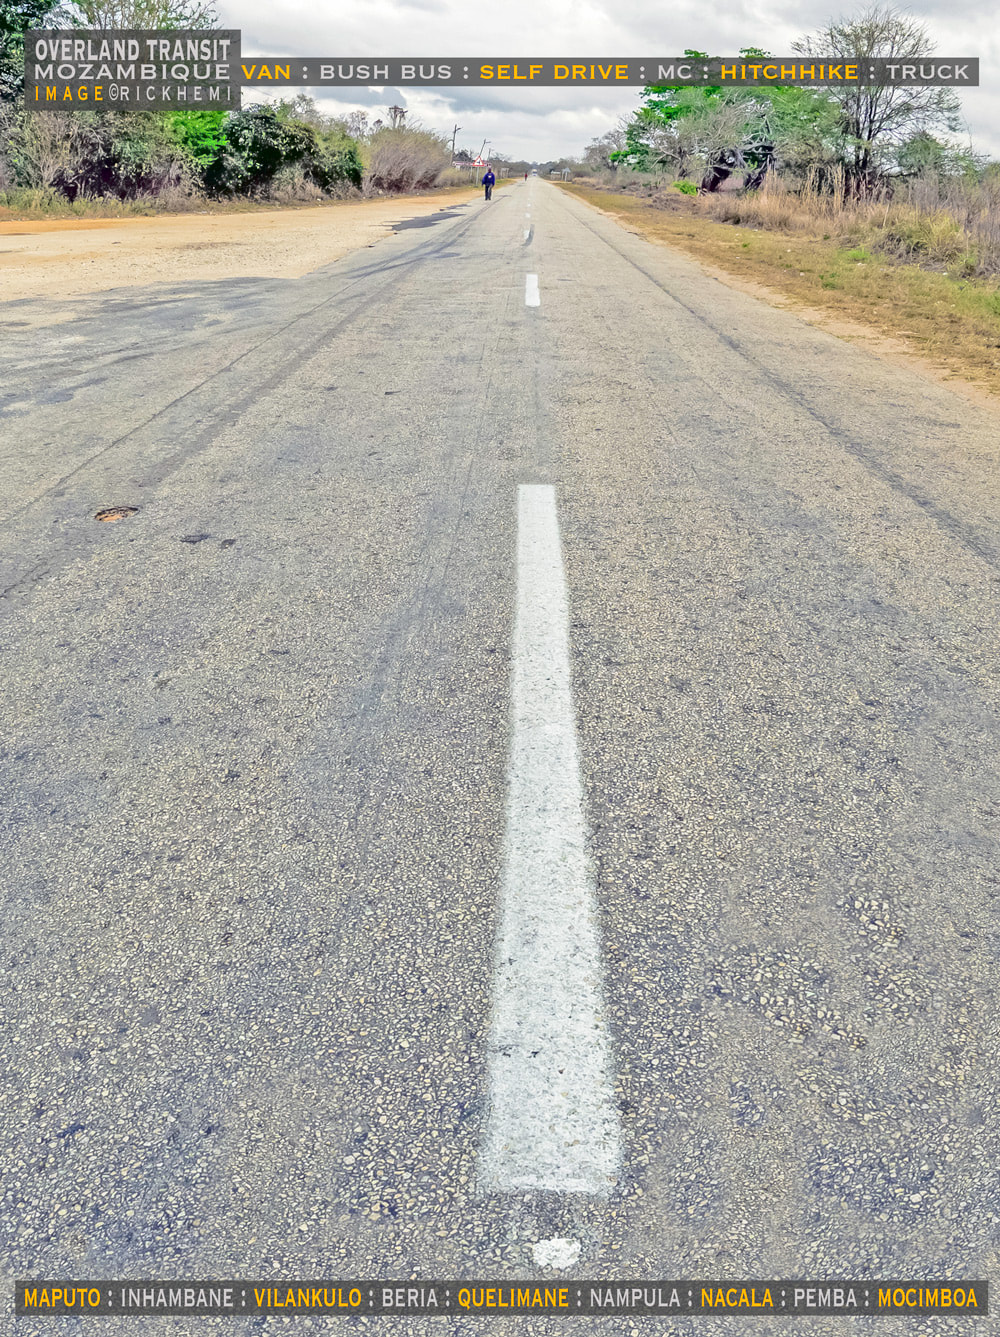 solo overland travel and transit, Mozambique highway, image by Rick Hemi